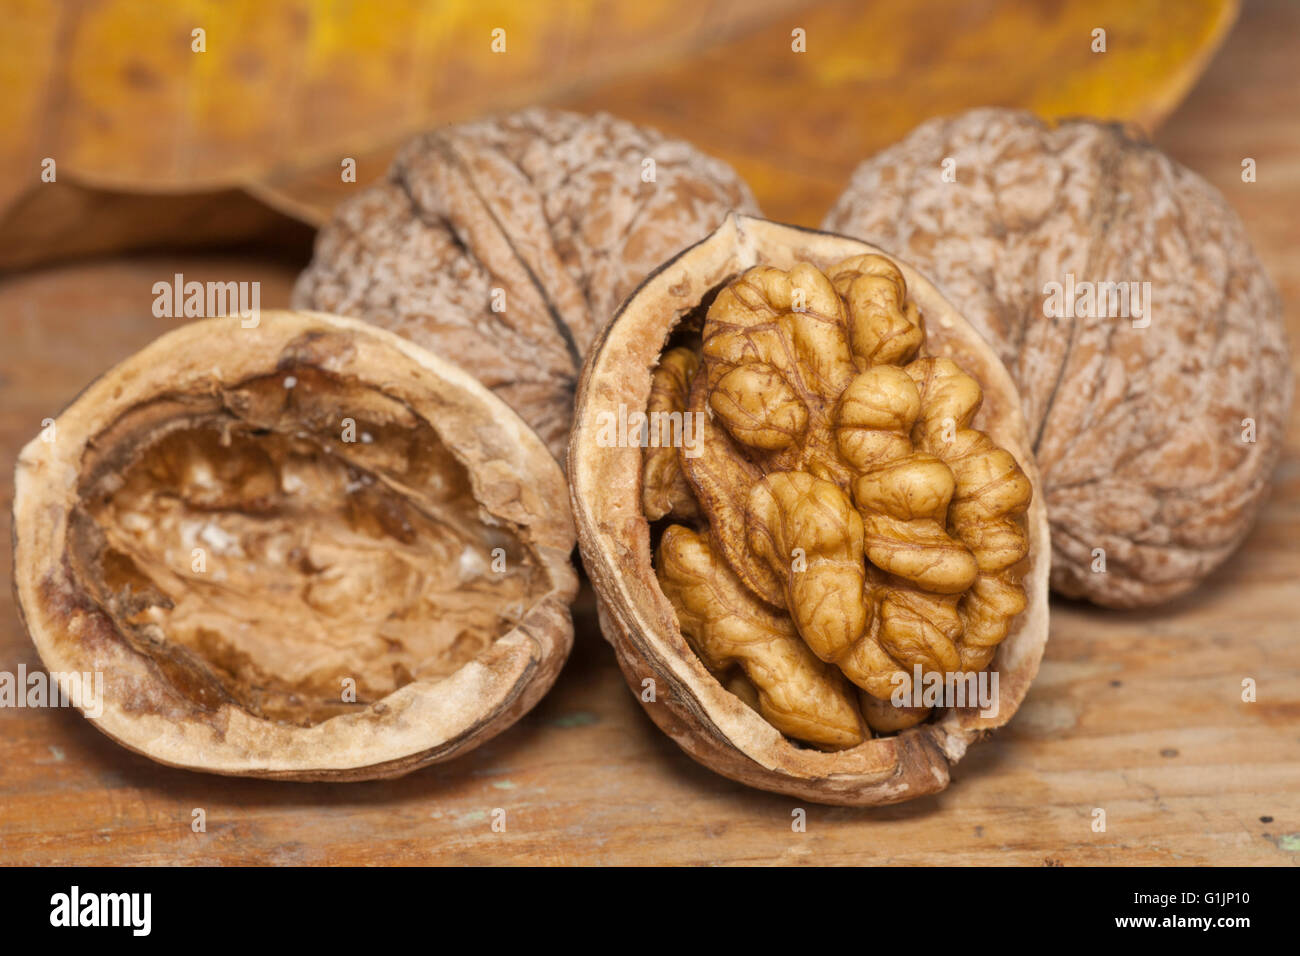 Cracked walnuts on wooden table Stock Photo